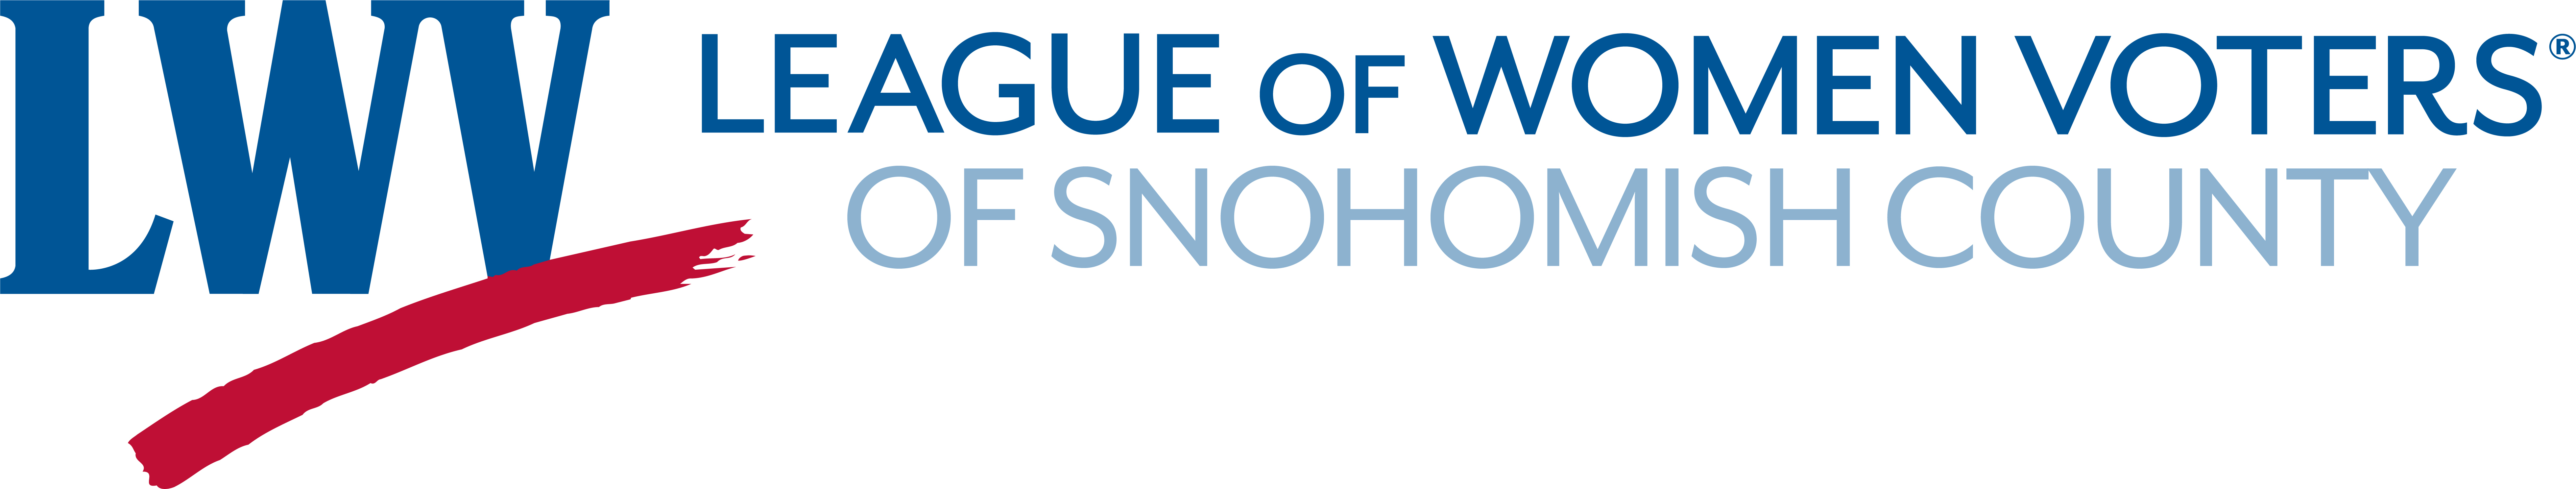 League of Women Voters Snohomish County